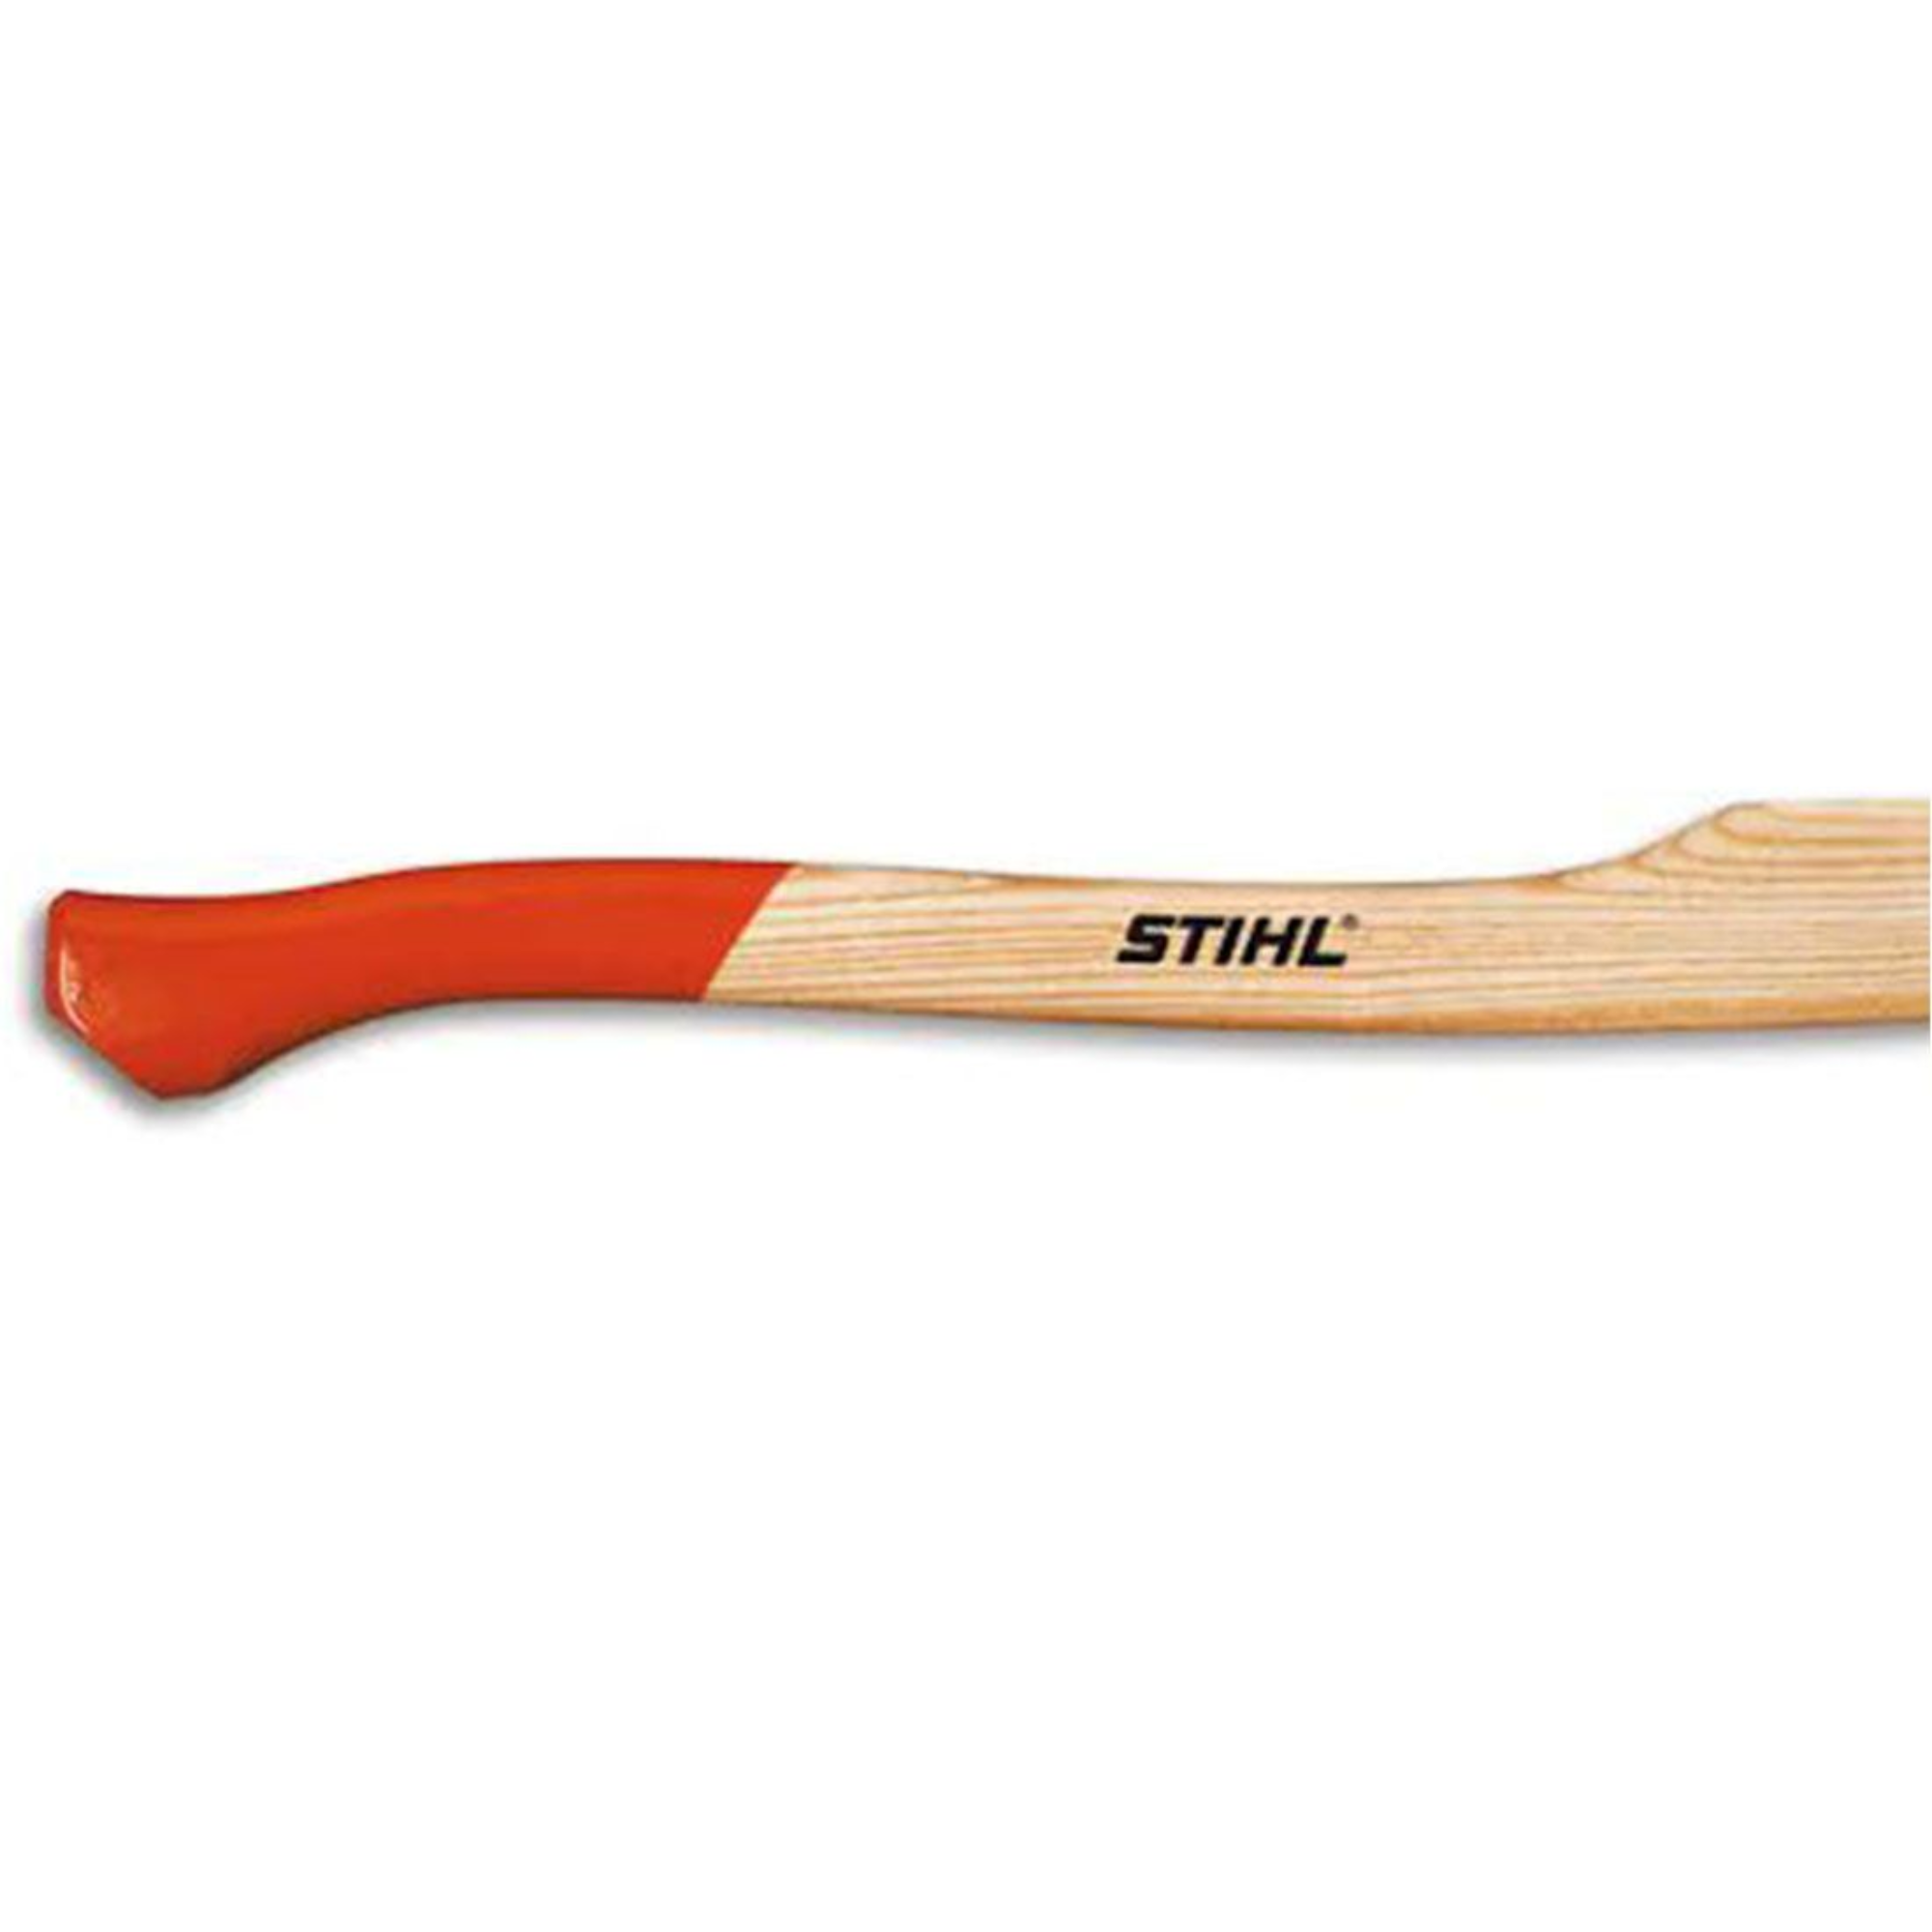 STIHL Replacement Handle Kit for Woodcutter Axe | 24" | 7010 881 2101